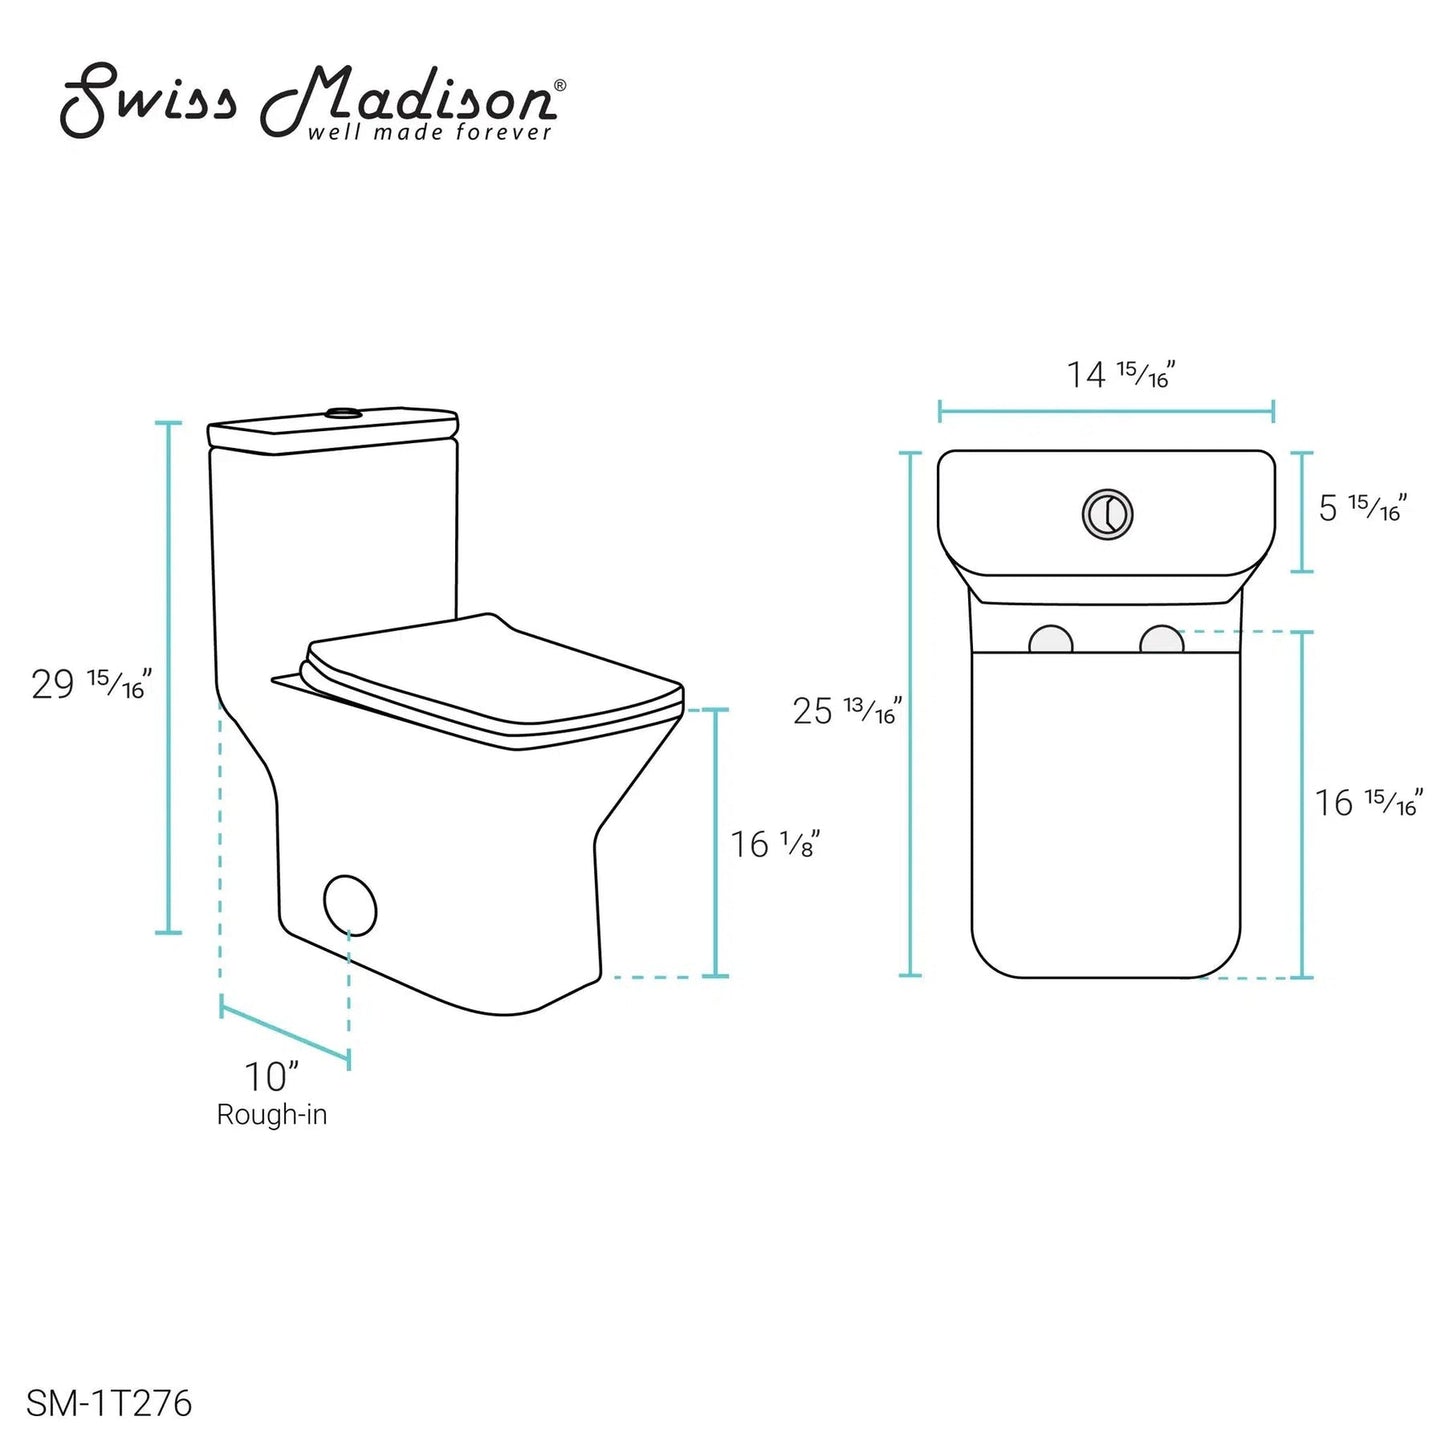 Swiss Madison Carre 15" x 30" One-Piece Glossy White Elongated Square Floor-Mounted Toilet With 1.1/1.6 GPF